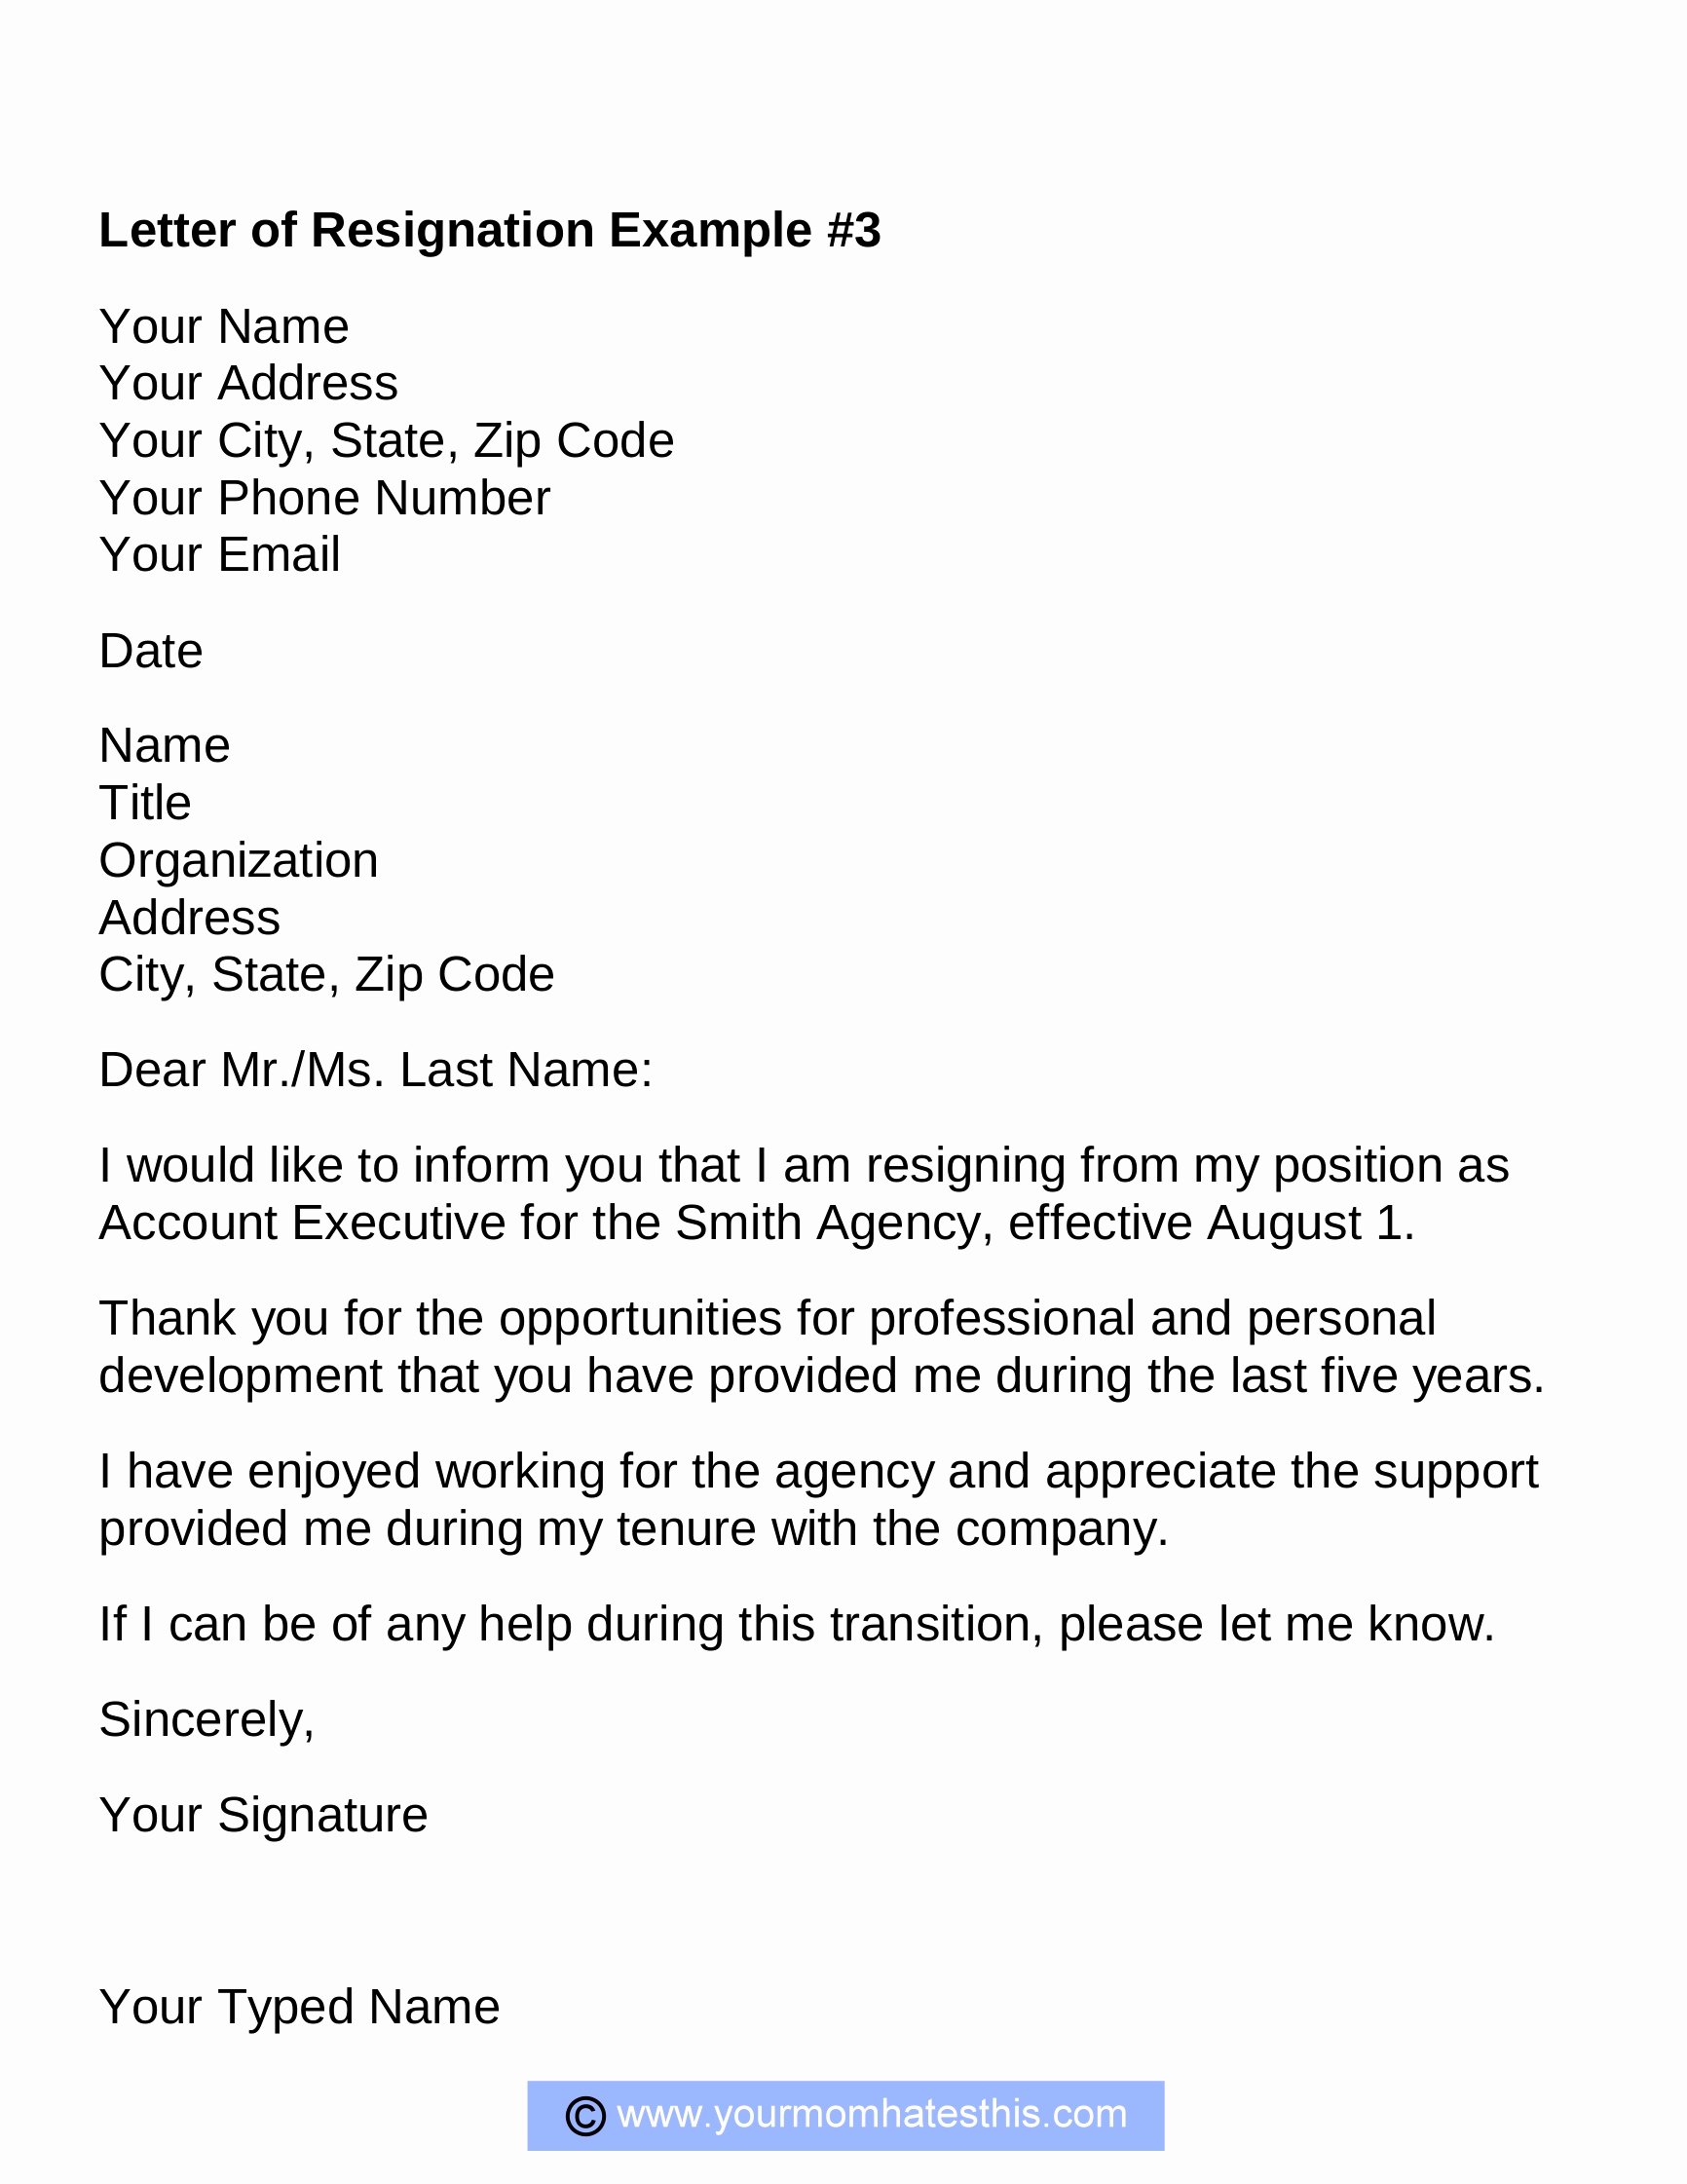 Professional Letter Of Resignation Awesome Resignation Letter Samples Download Pdf Doc format